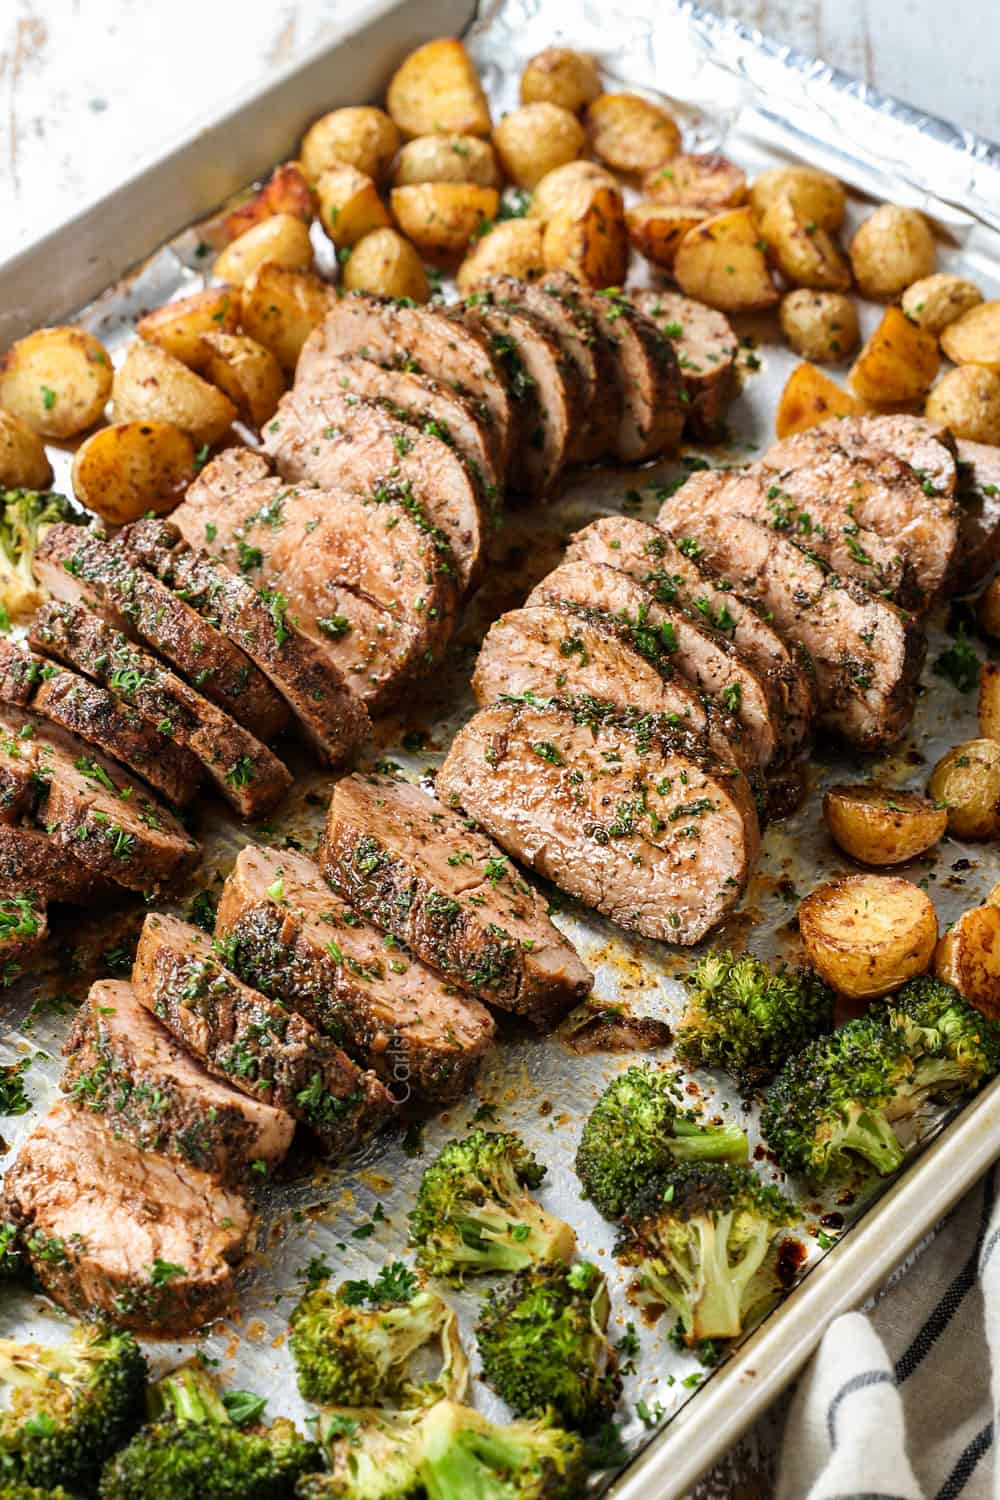 balsamic pork tenderloin roasted in the oven sliced on a baking sheet garnished by parsley